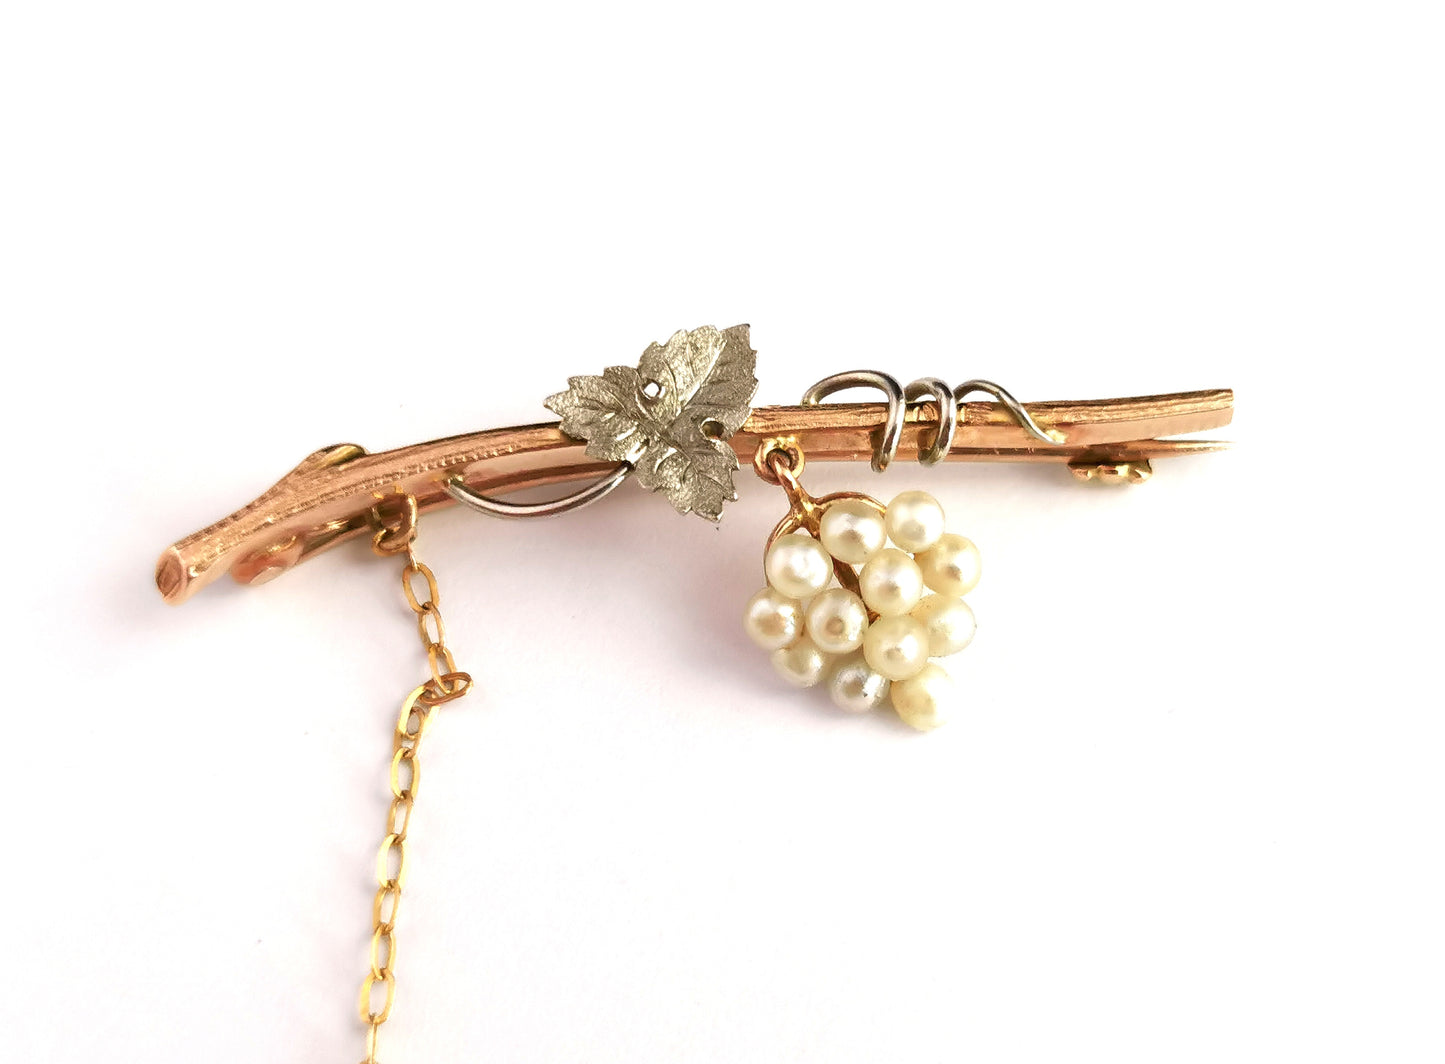 Antique pearl Grapes tremblant brooch, 15ct gold and silver